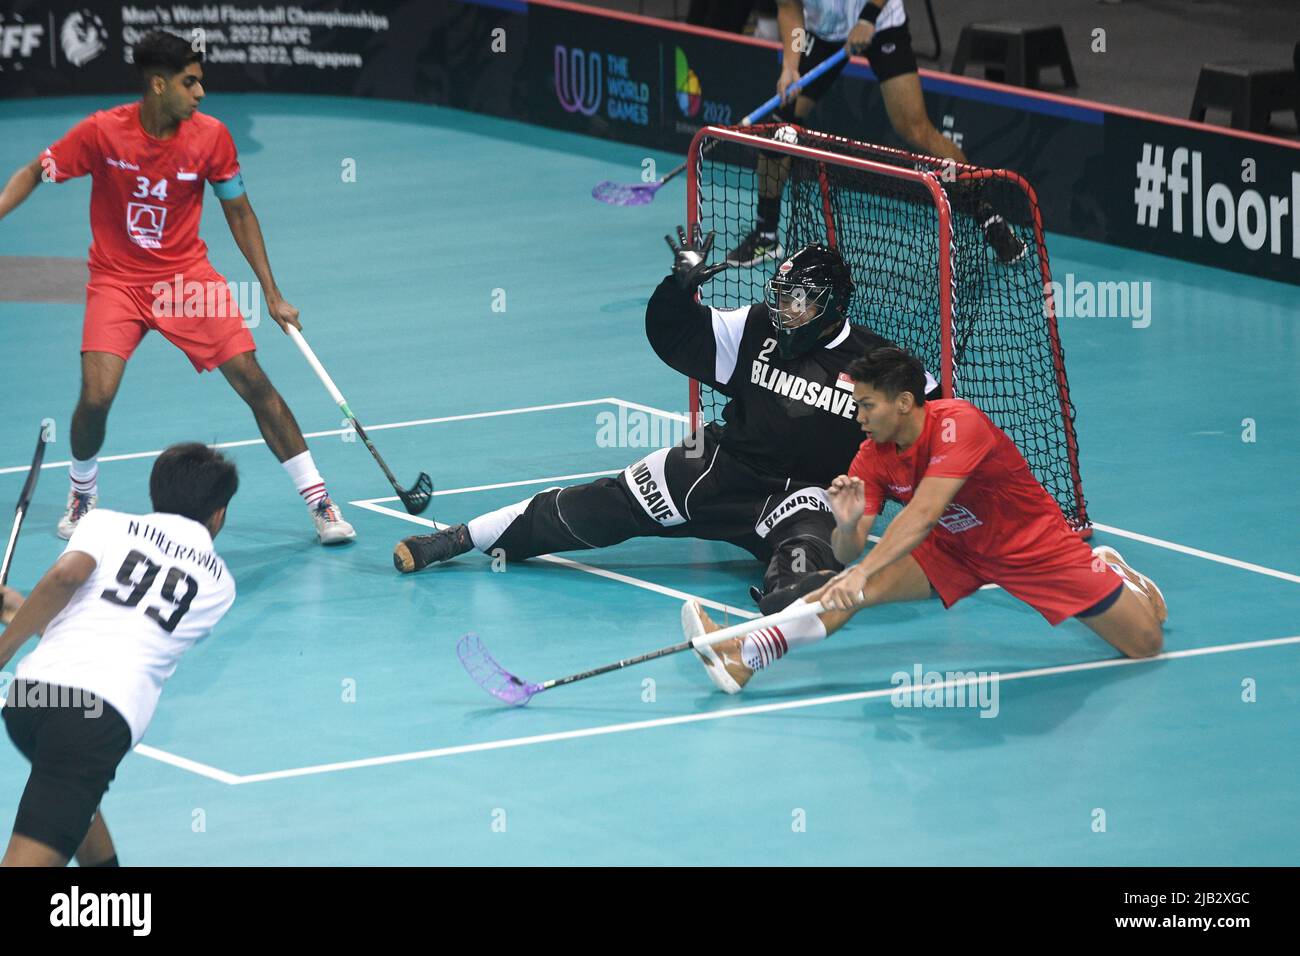 Singapore, AOFC (Asia-Oceania Floorball Confederation) in Singapore. 2nd  June, 2022. Noisoi Theerawat (bottom L) of Thailand scores a goal during a  Group H match at the Men's World Floorball Championships Qualification, 2022